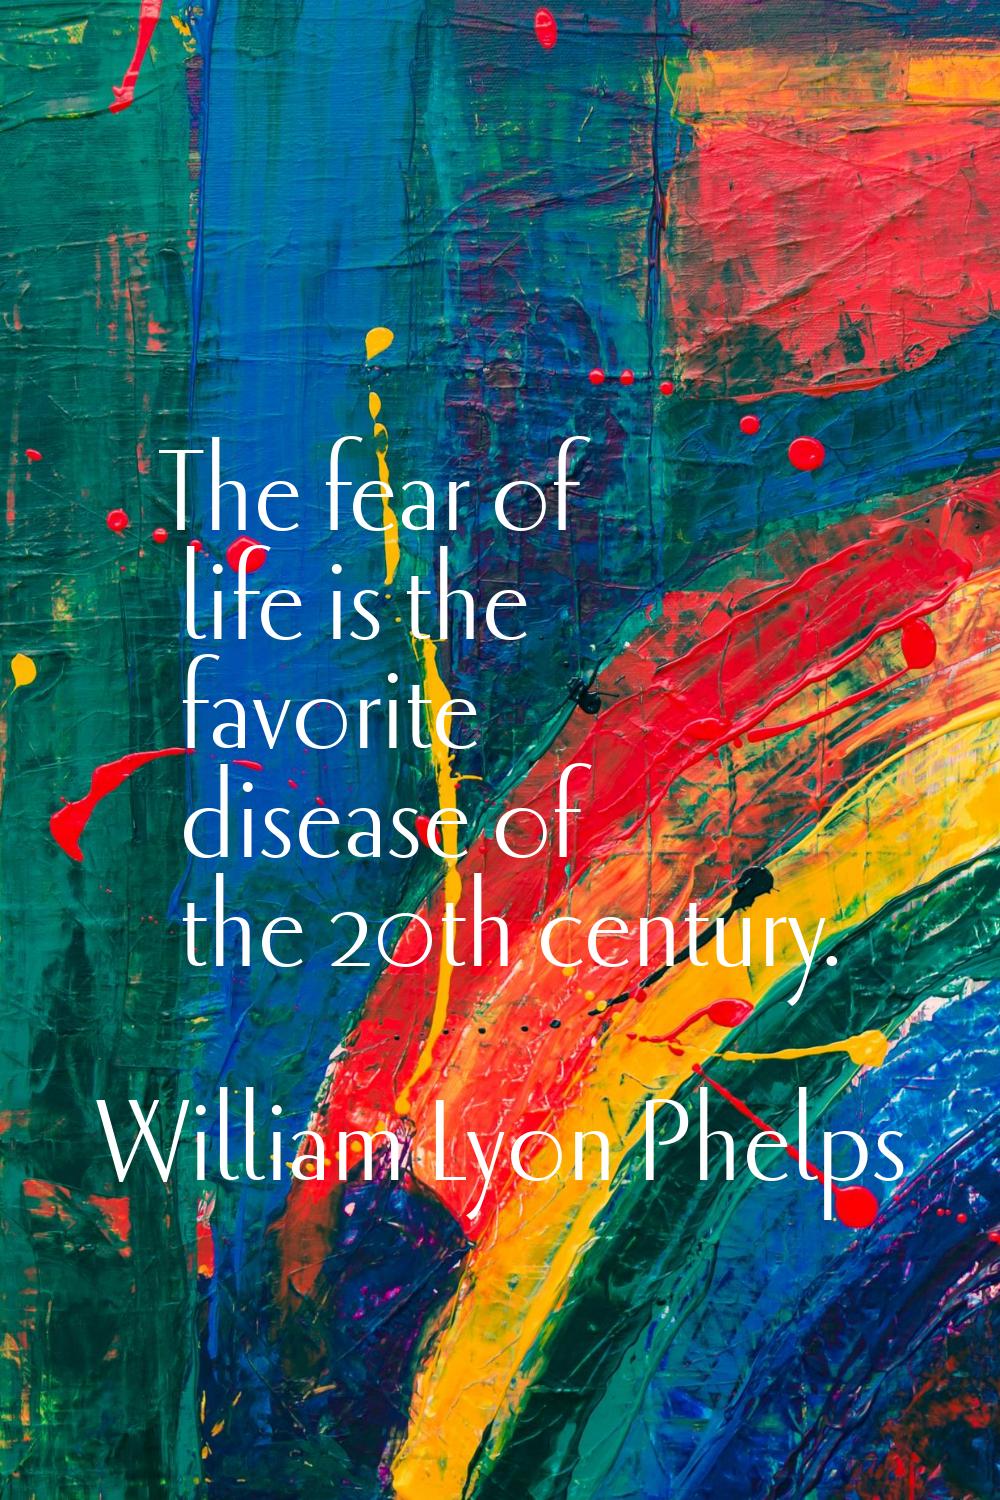 The fear of life is the favorite disease of the 20th century.